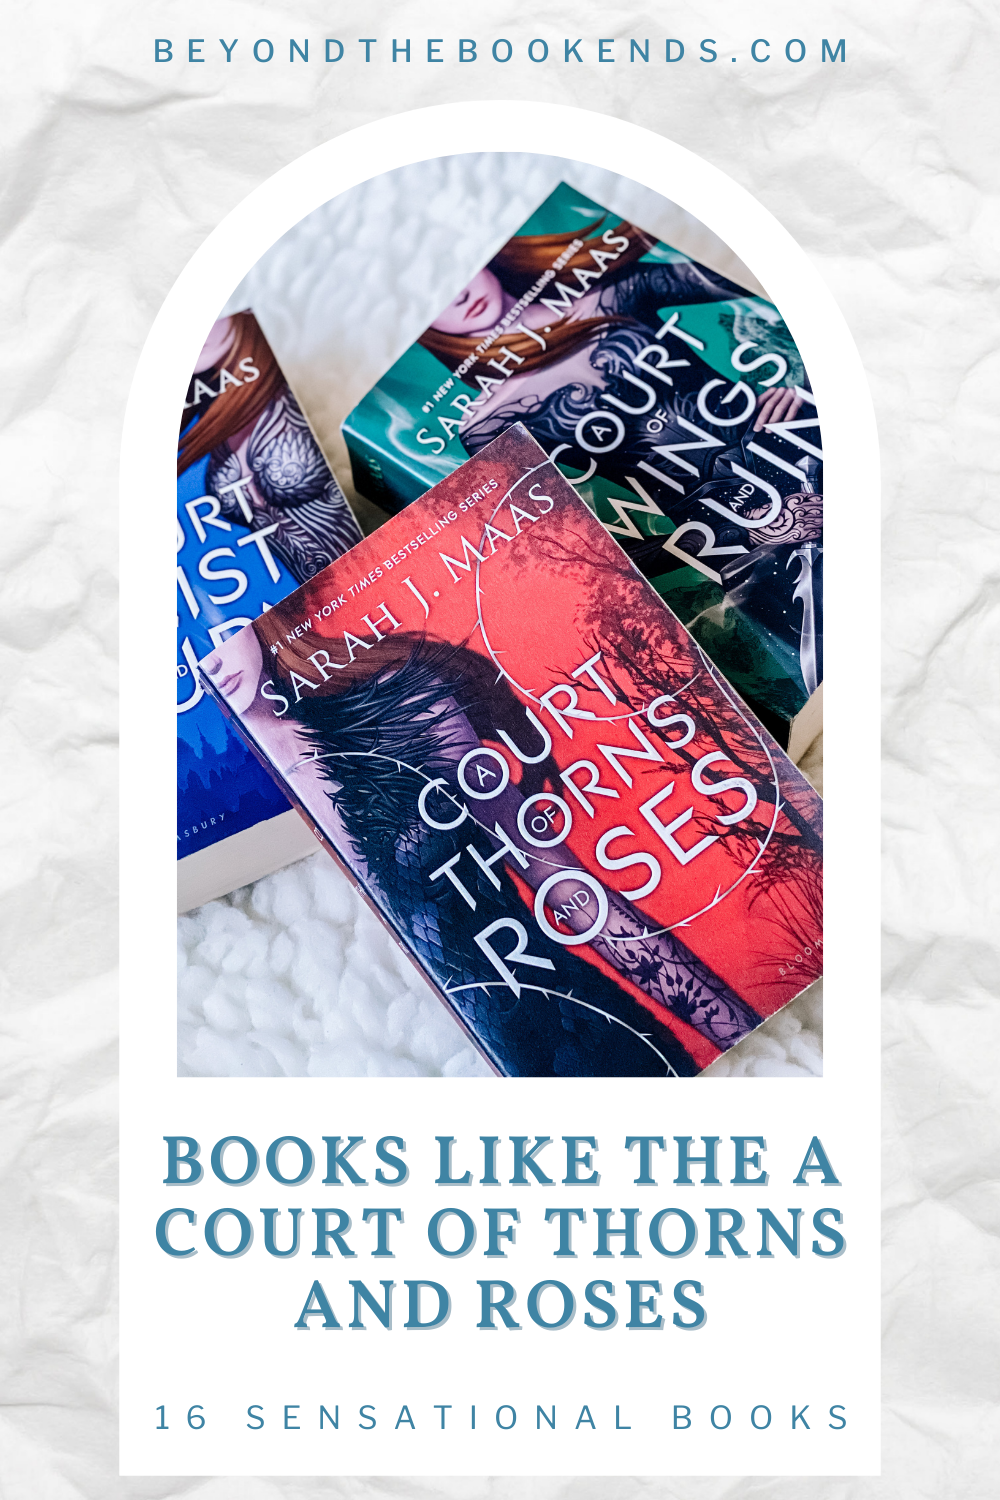 16 Sensational Books Like A Court of Thorns and Roses